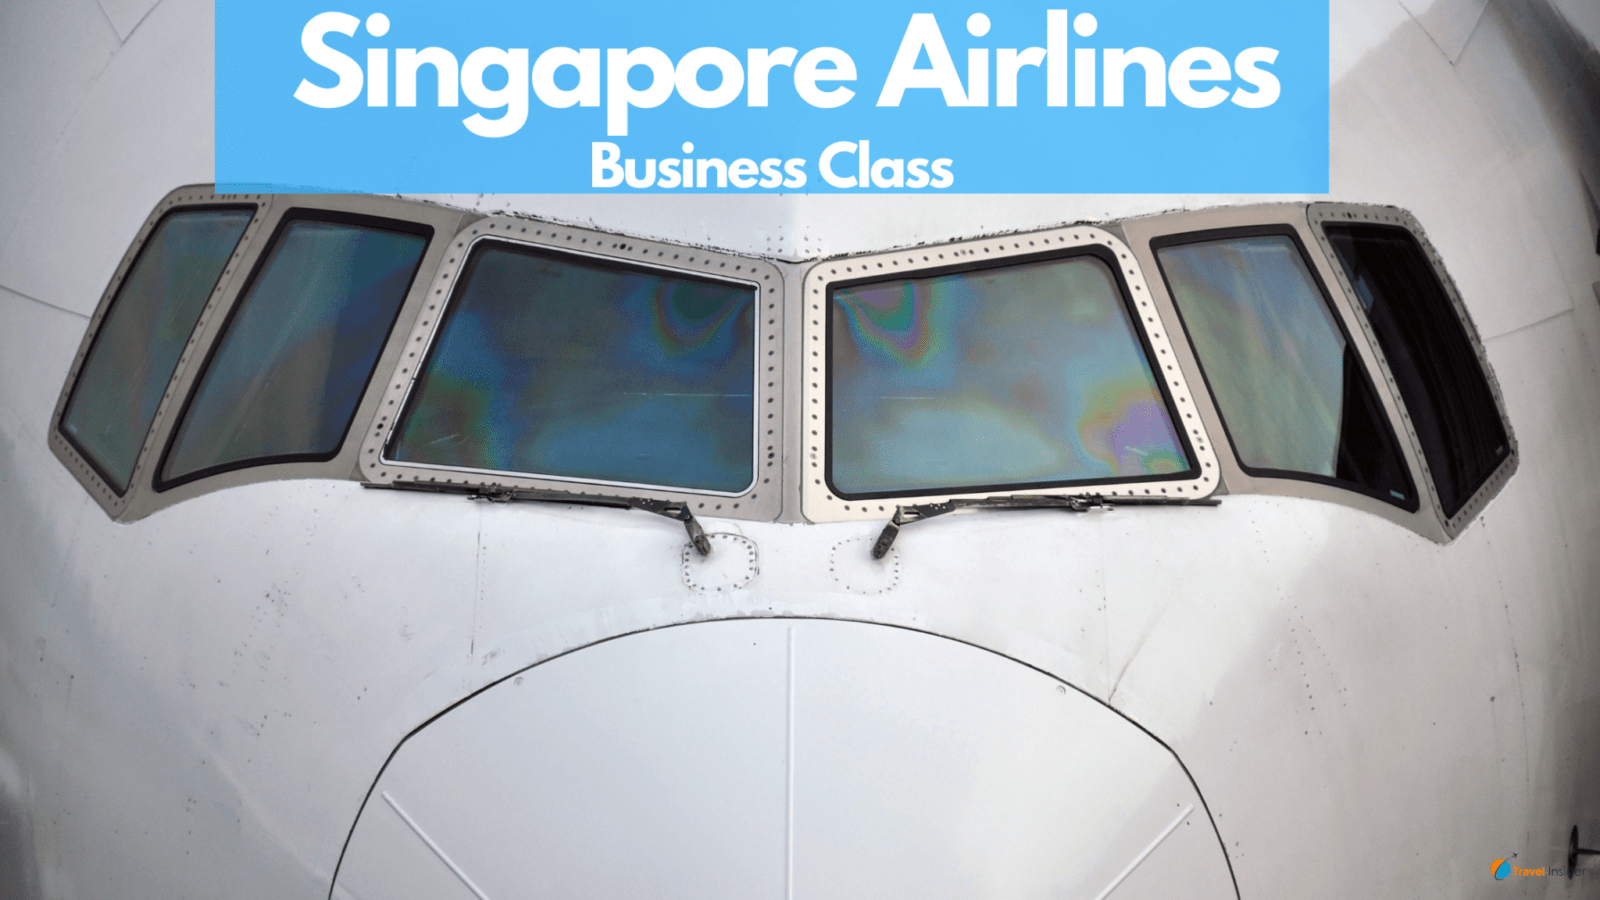 Singapore Airlines Business Class ab 400 Euro